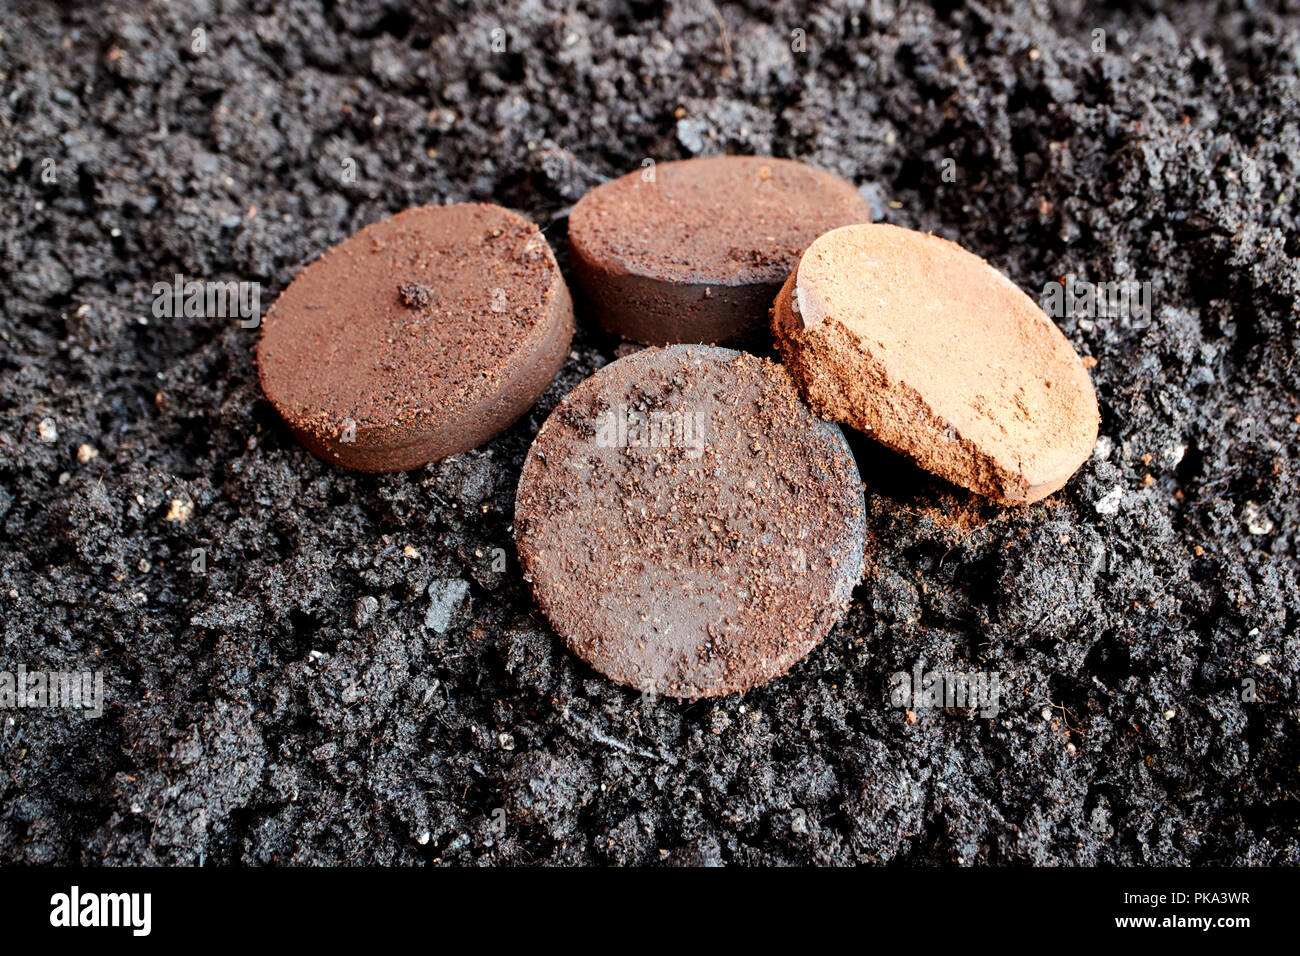 Adding Used Coffee Grounds To Compost And Soil For Conditioning In